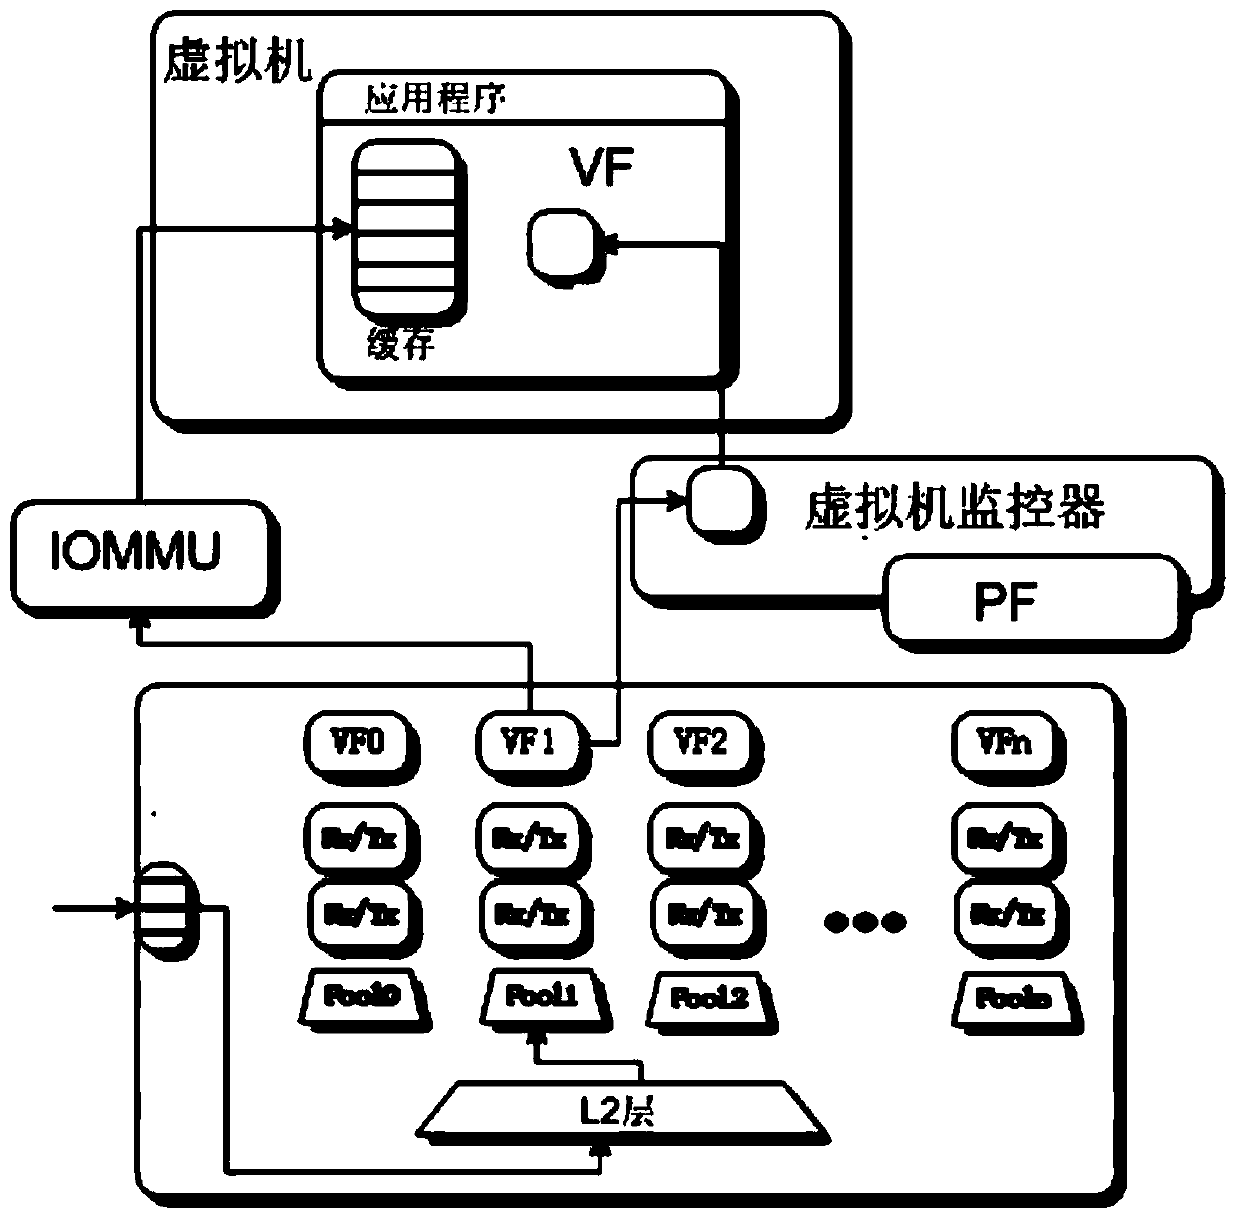 Dispatching method of virtual processor based on NUMA high-performance network cache resource affinity